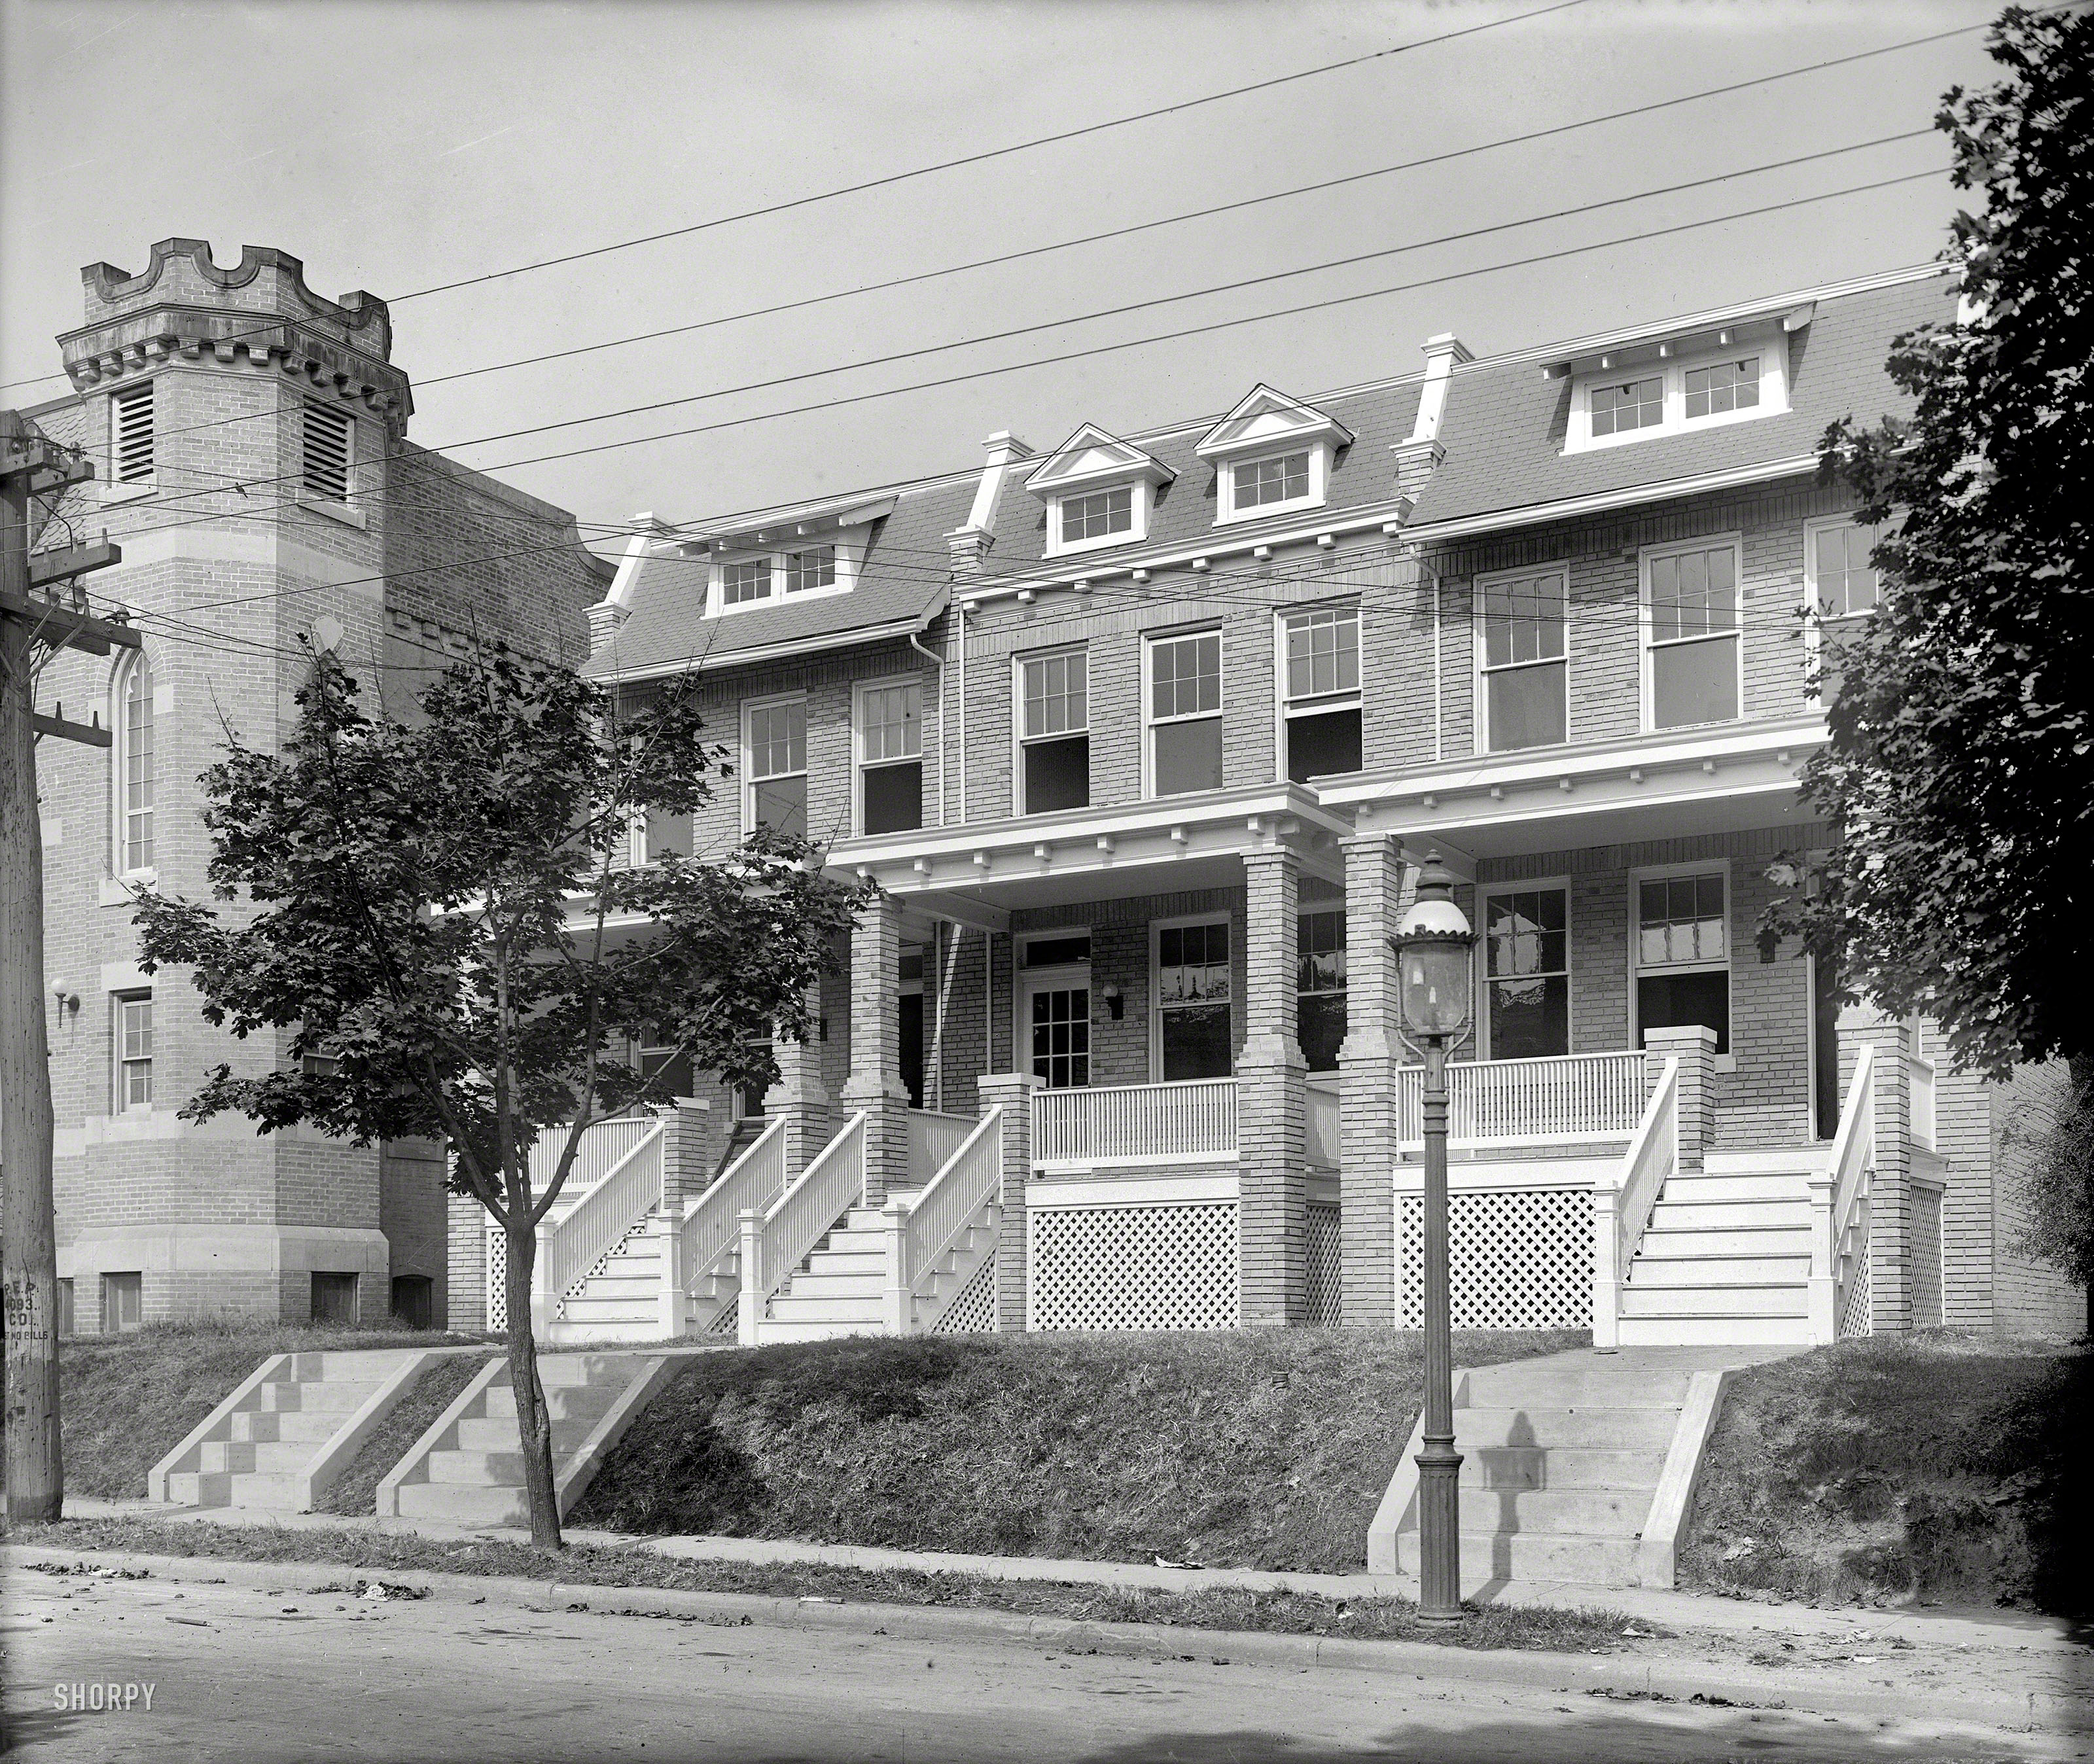 Washington, D.C., circa 1920. "551-53-55 Randolph St. N.W." We'll take the one next to the castle. National Photo Company glass negative. View full size.